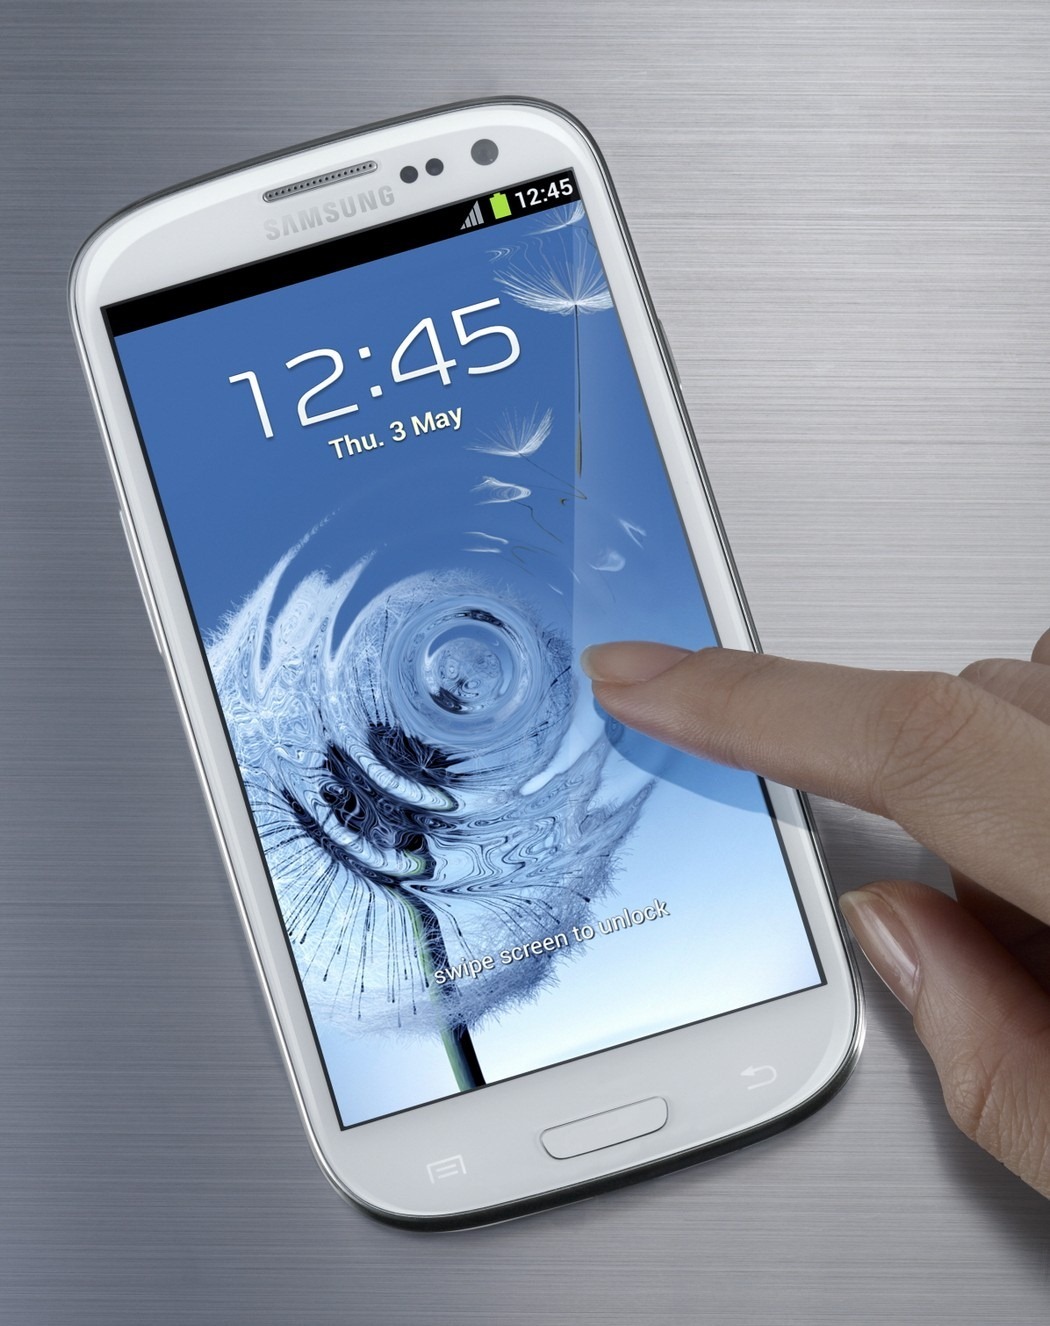 Samsung Galaxy S Iii Full Specs And Price Details Gadgetian